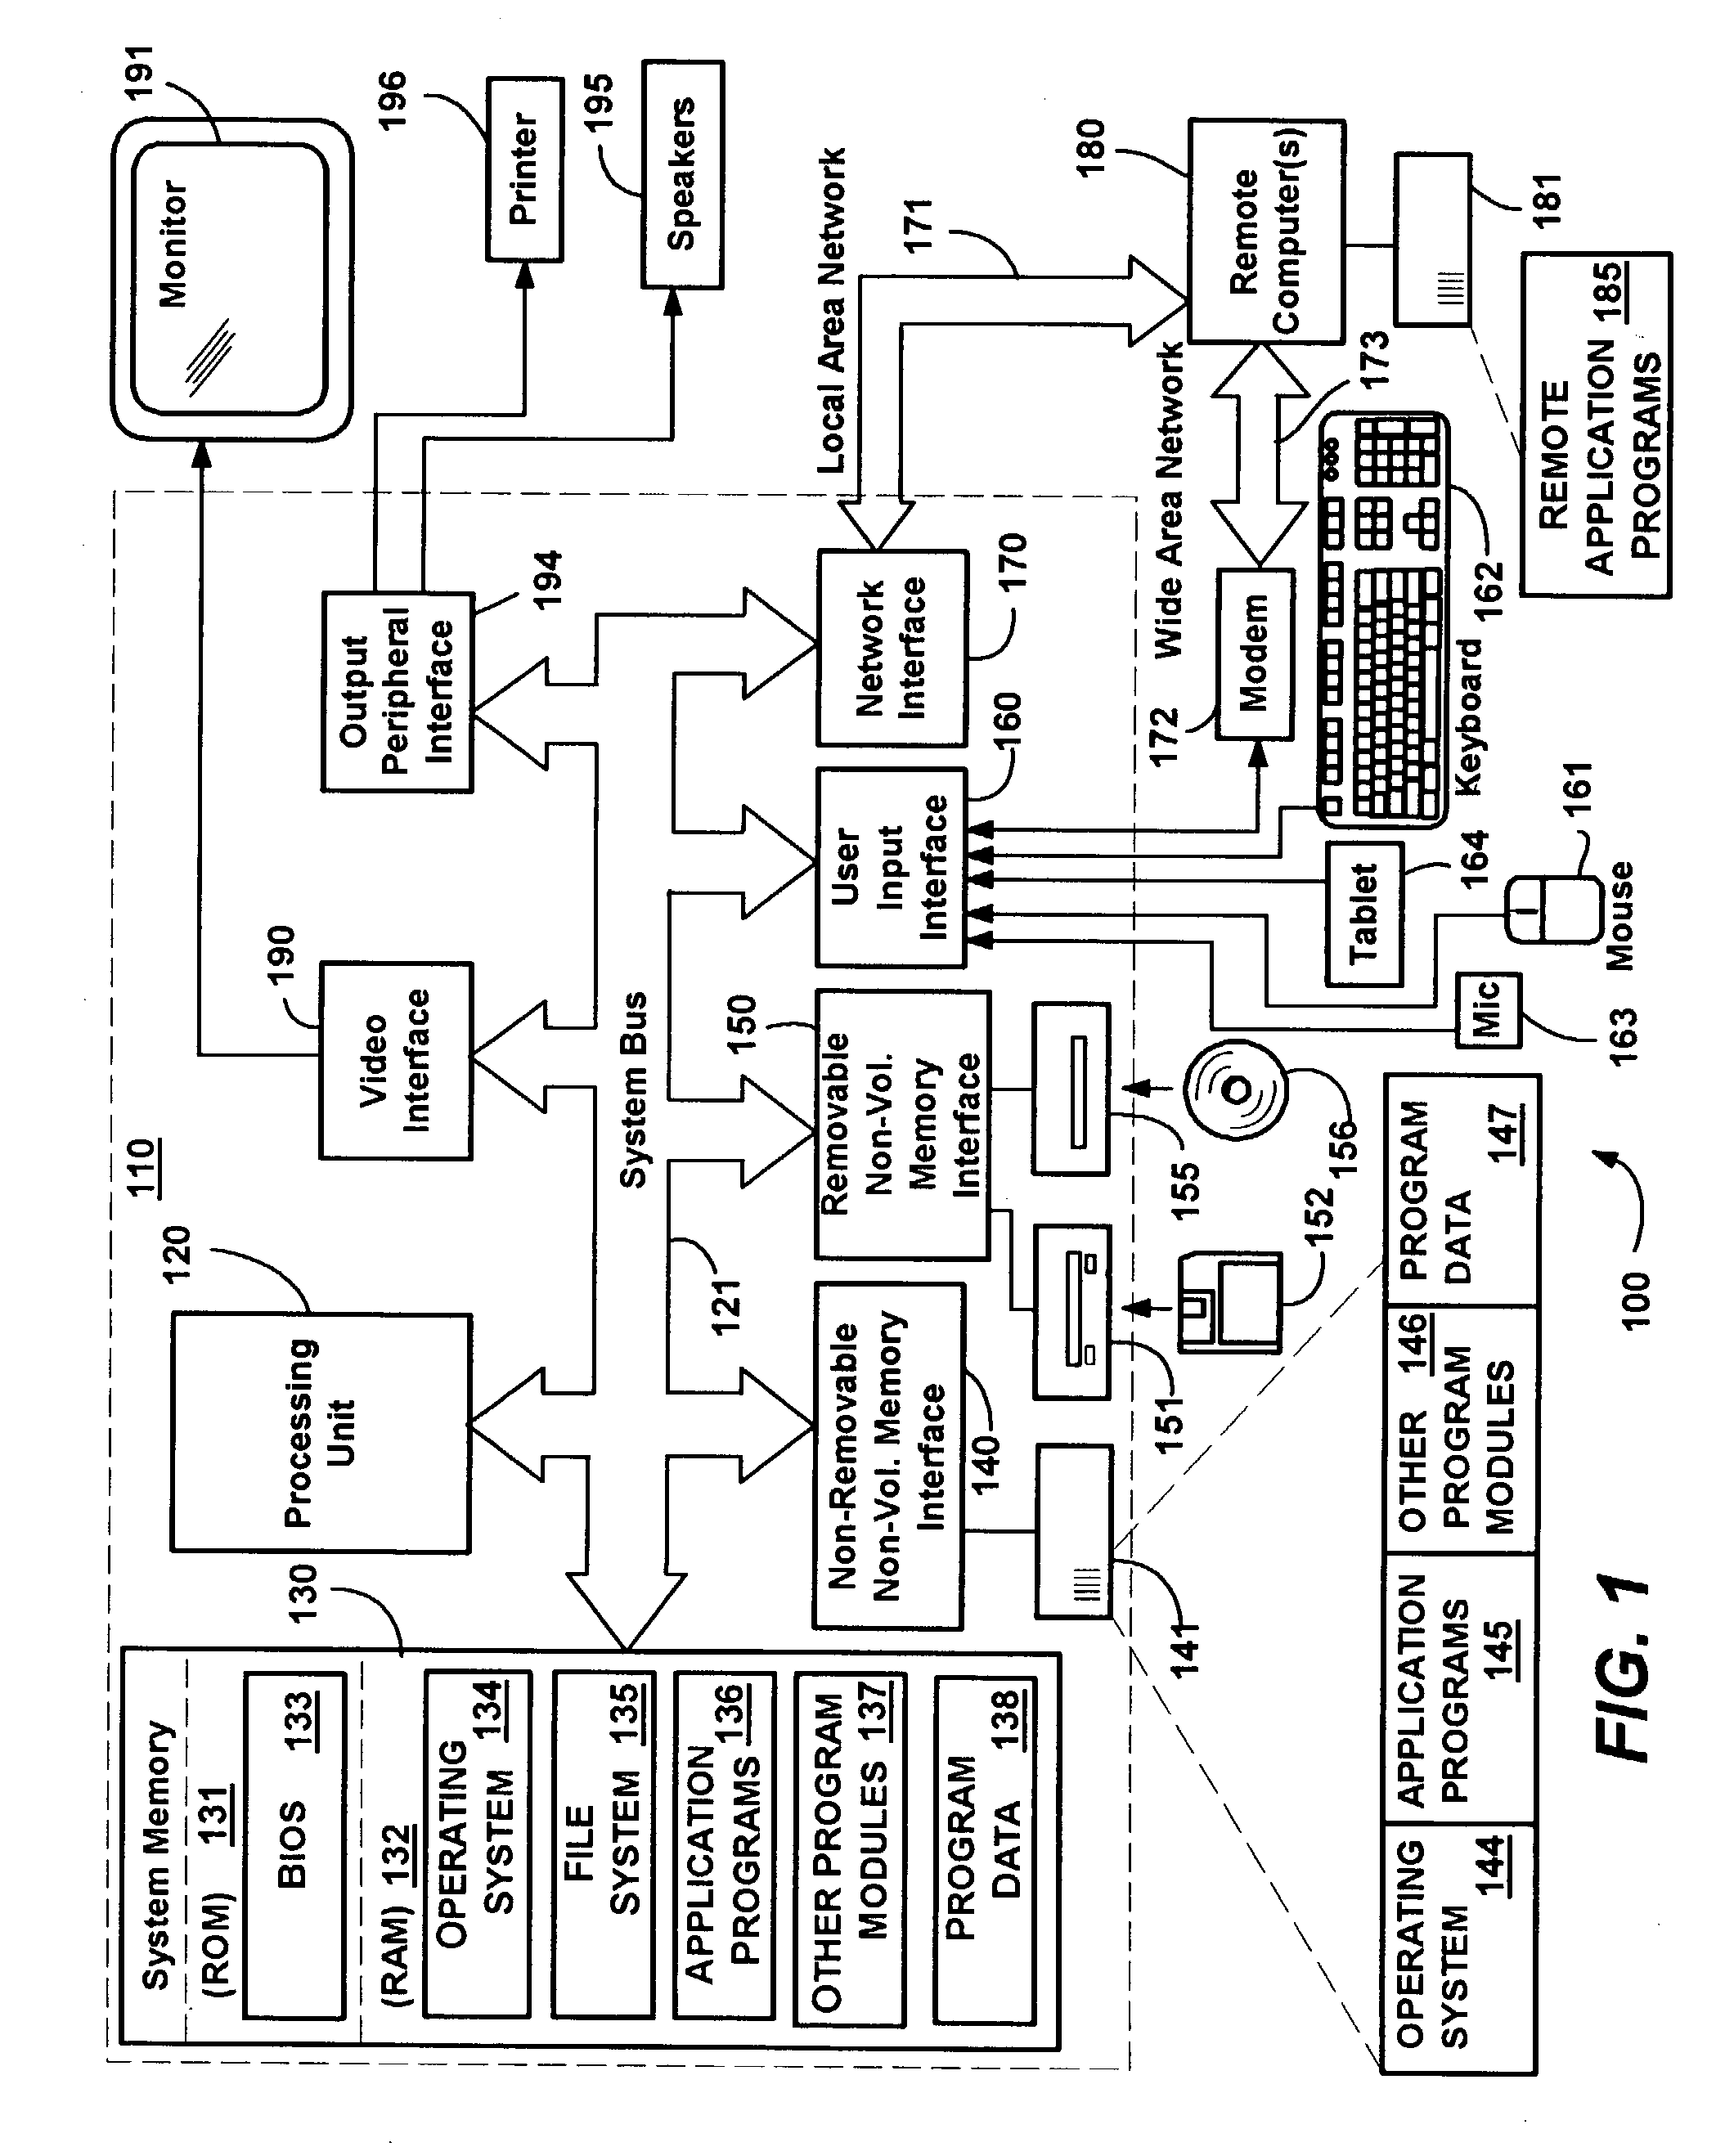 Managed file system filter model and architecture